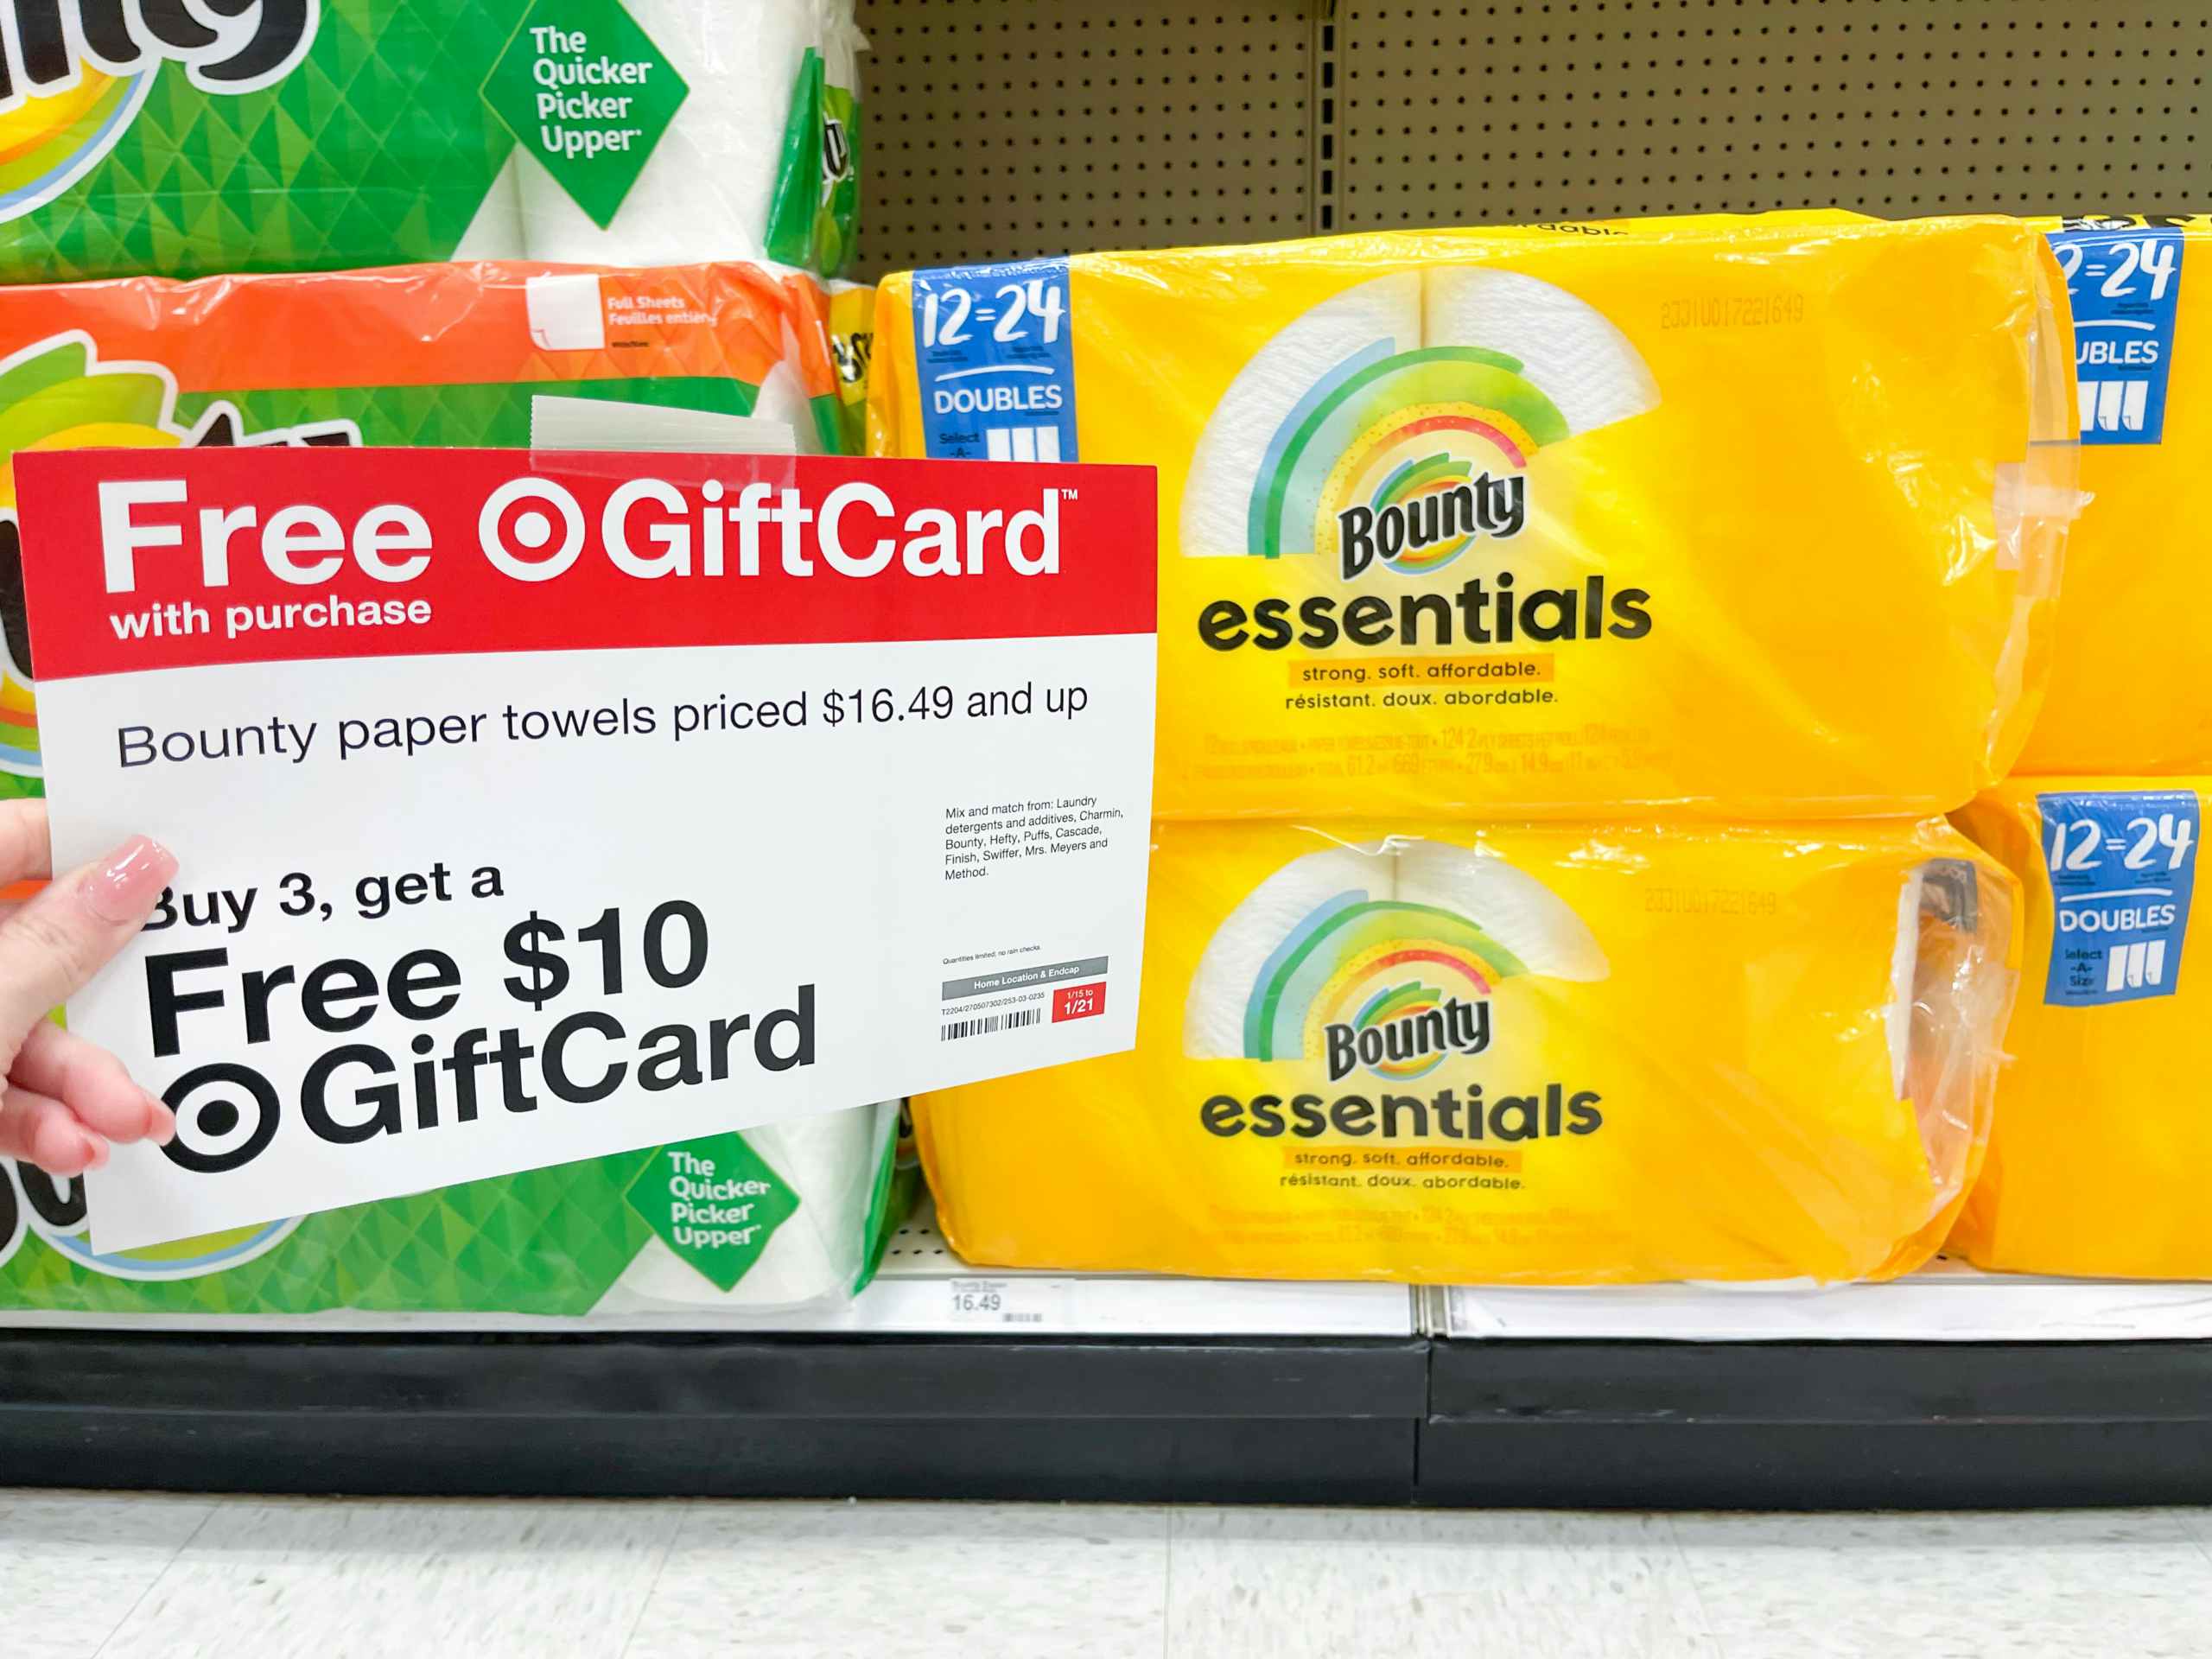 A Free Giftcard sign held out by hand in front of rolls of Bounty Essentials paper towels.